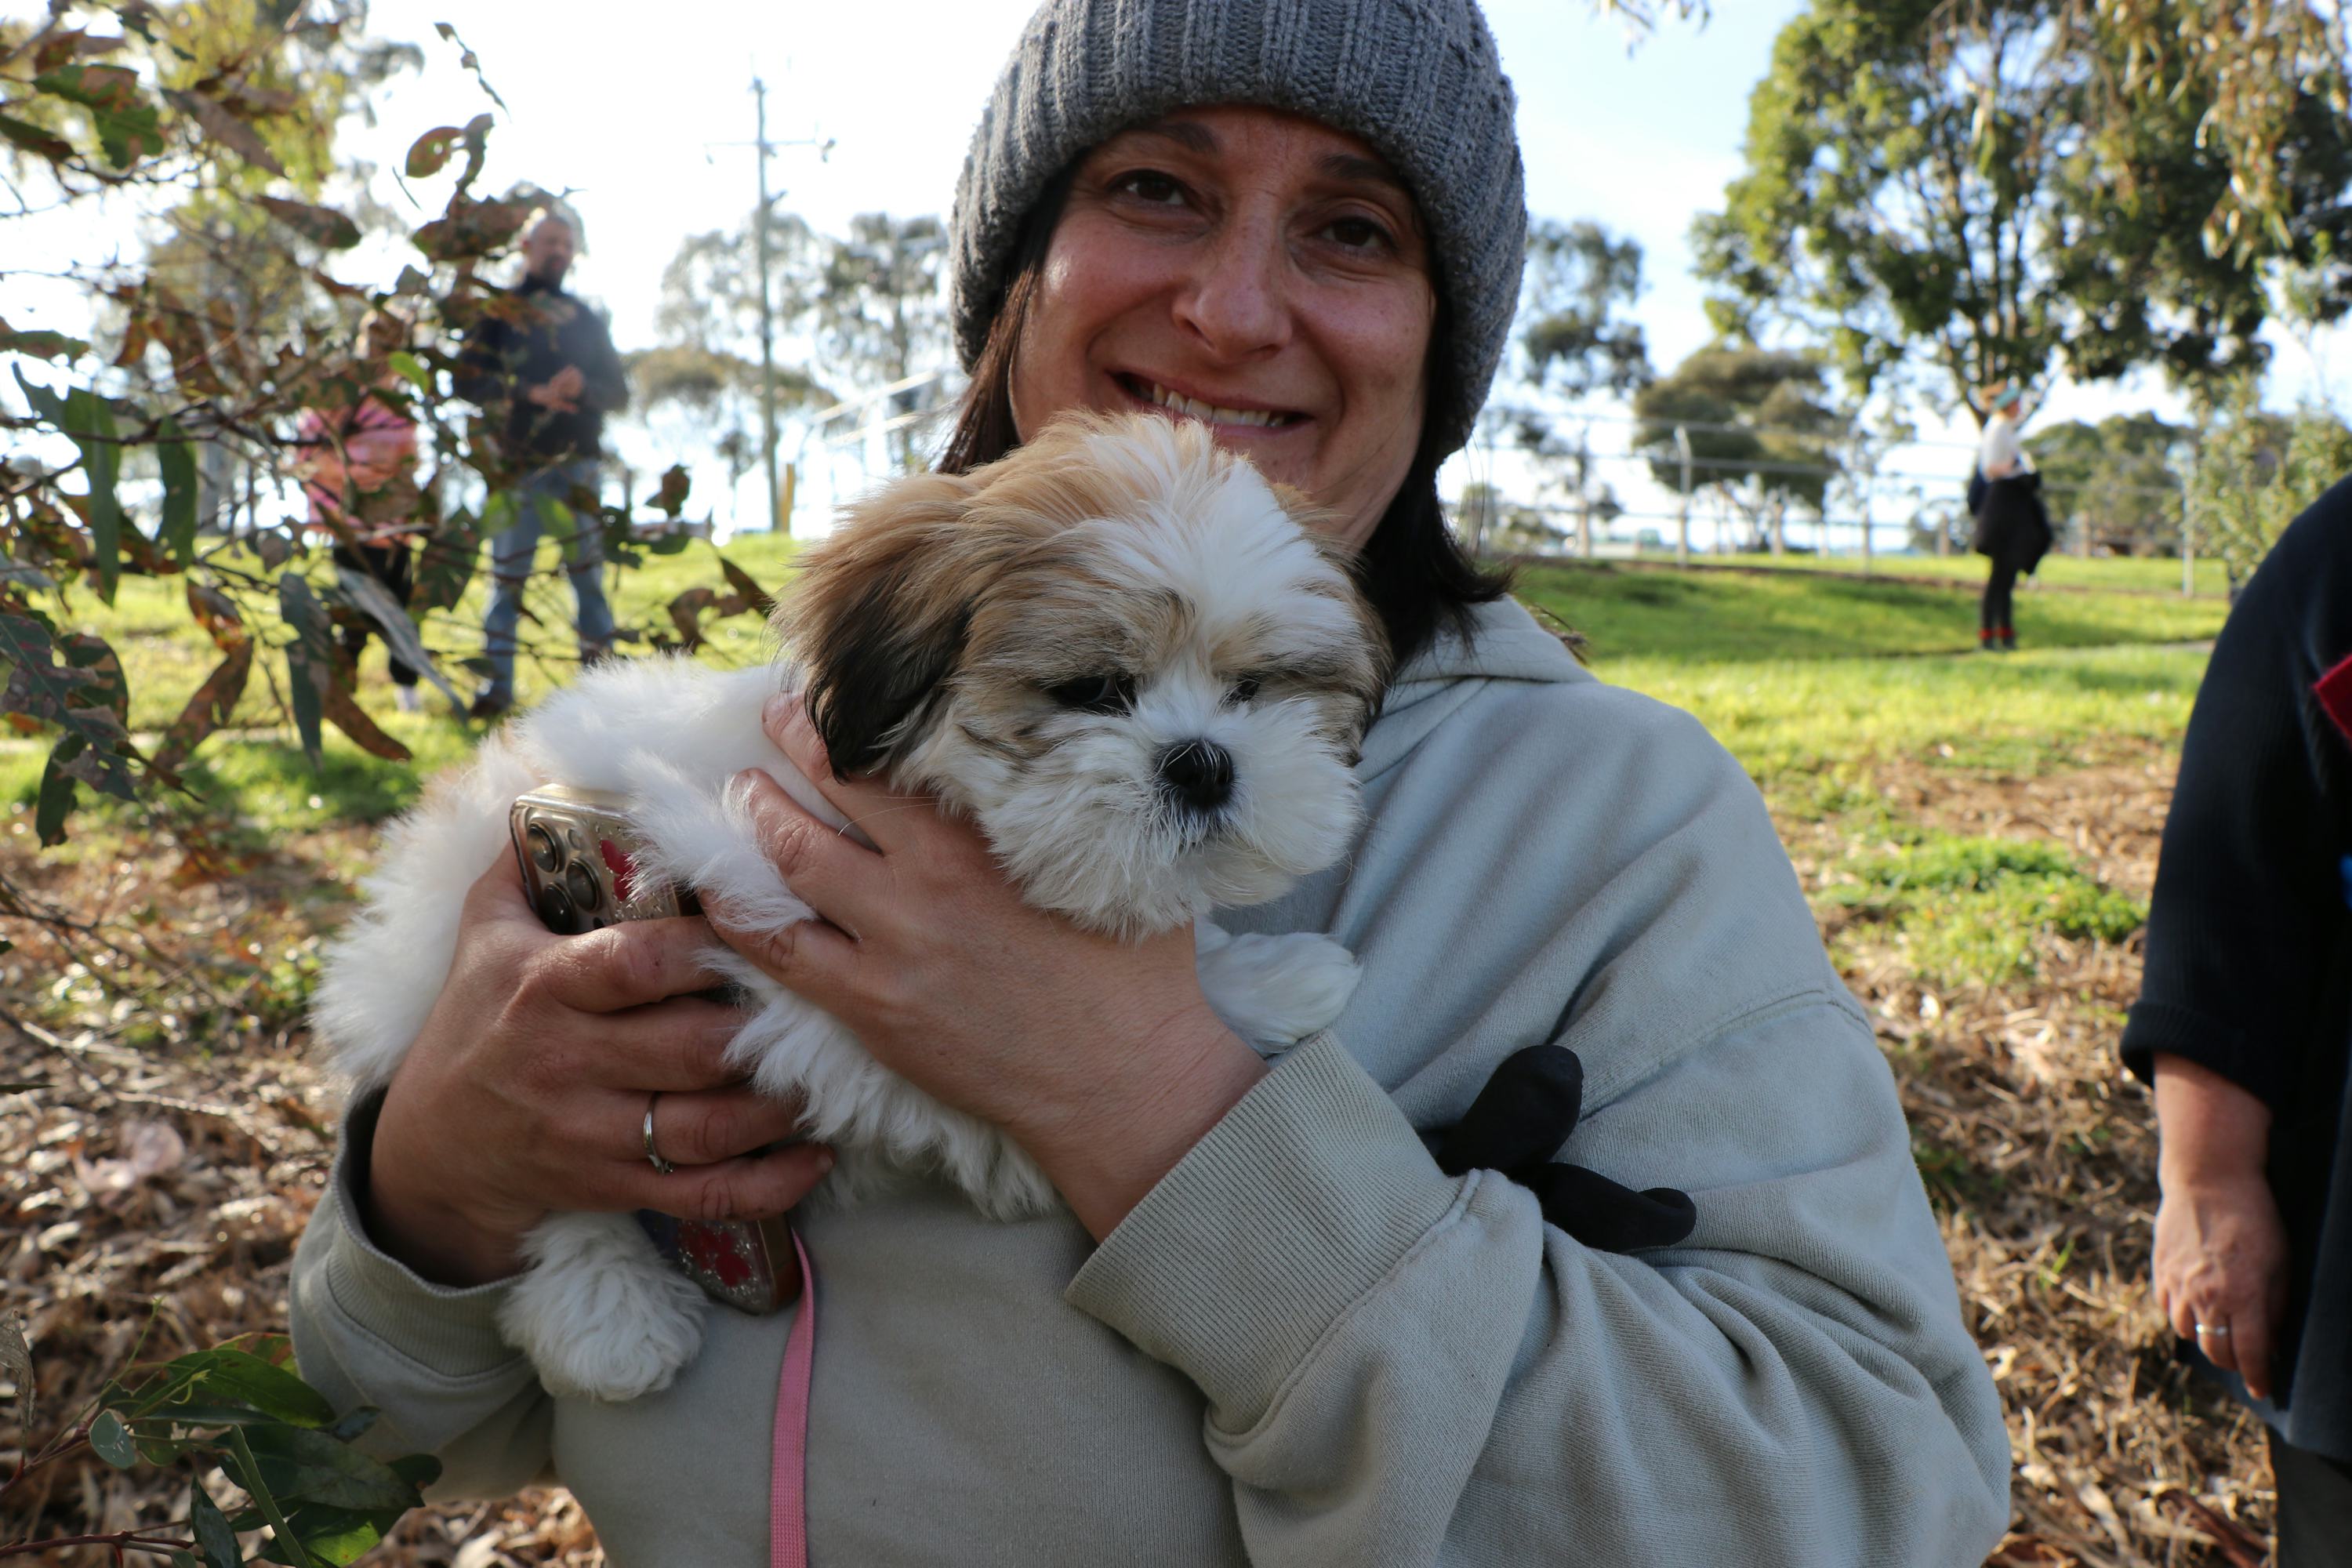 Lucy the puppy and friend at the planting site. Image credit: Jen McMillan